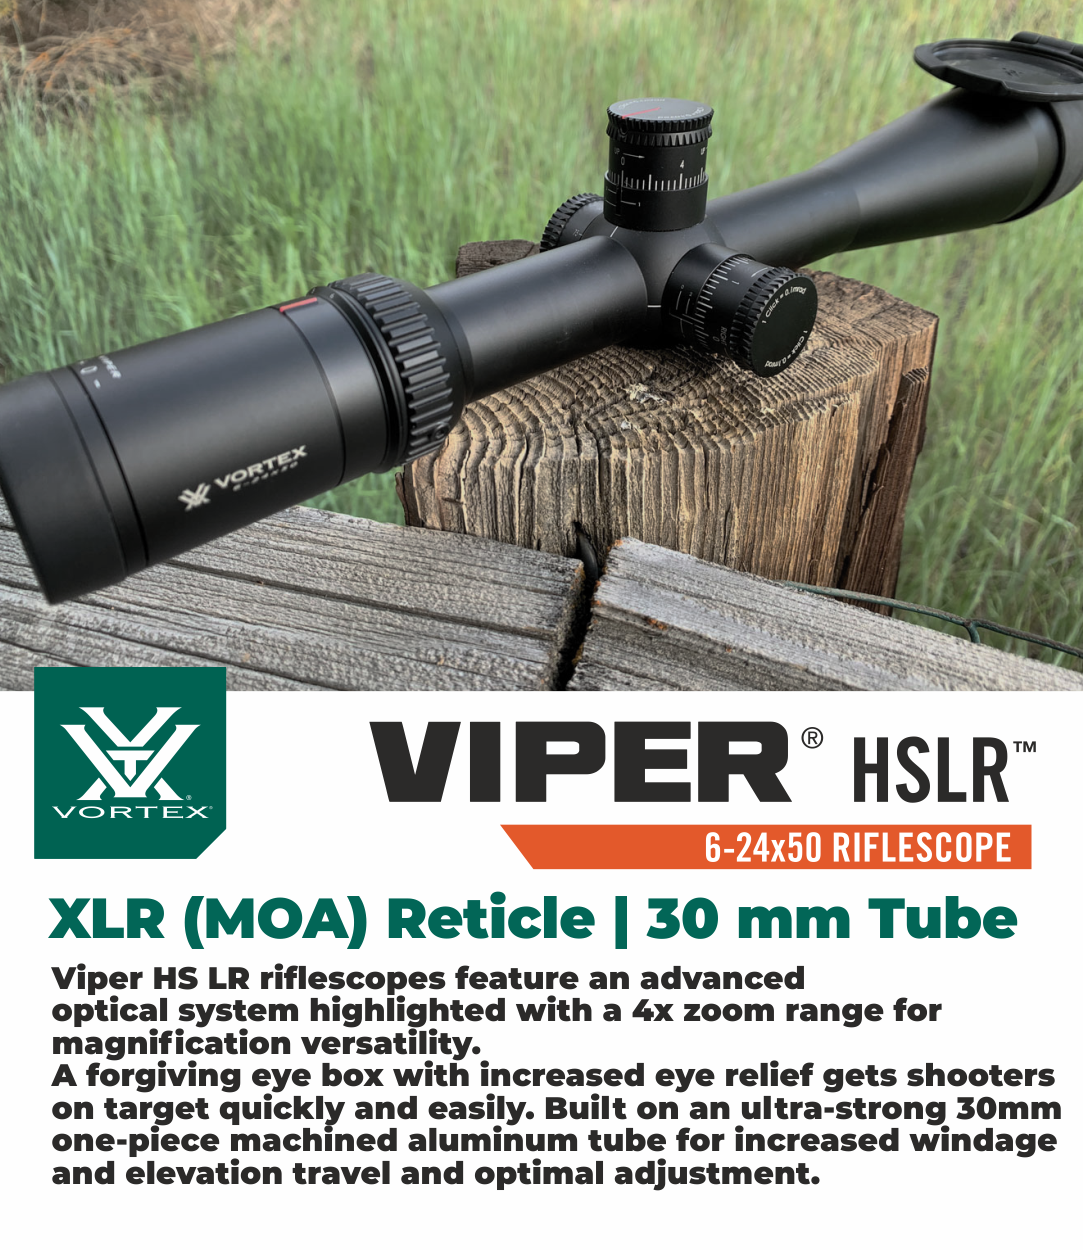 Vortex Optics Viper HSLR 6-24X50 XLR (MOA) Reticle First Focal Plane, 30 mm Tube with Free Hat Bundle - image 4 of 7